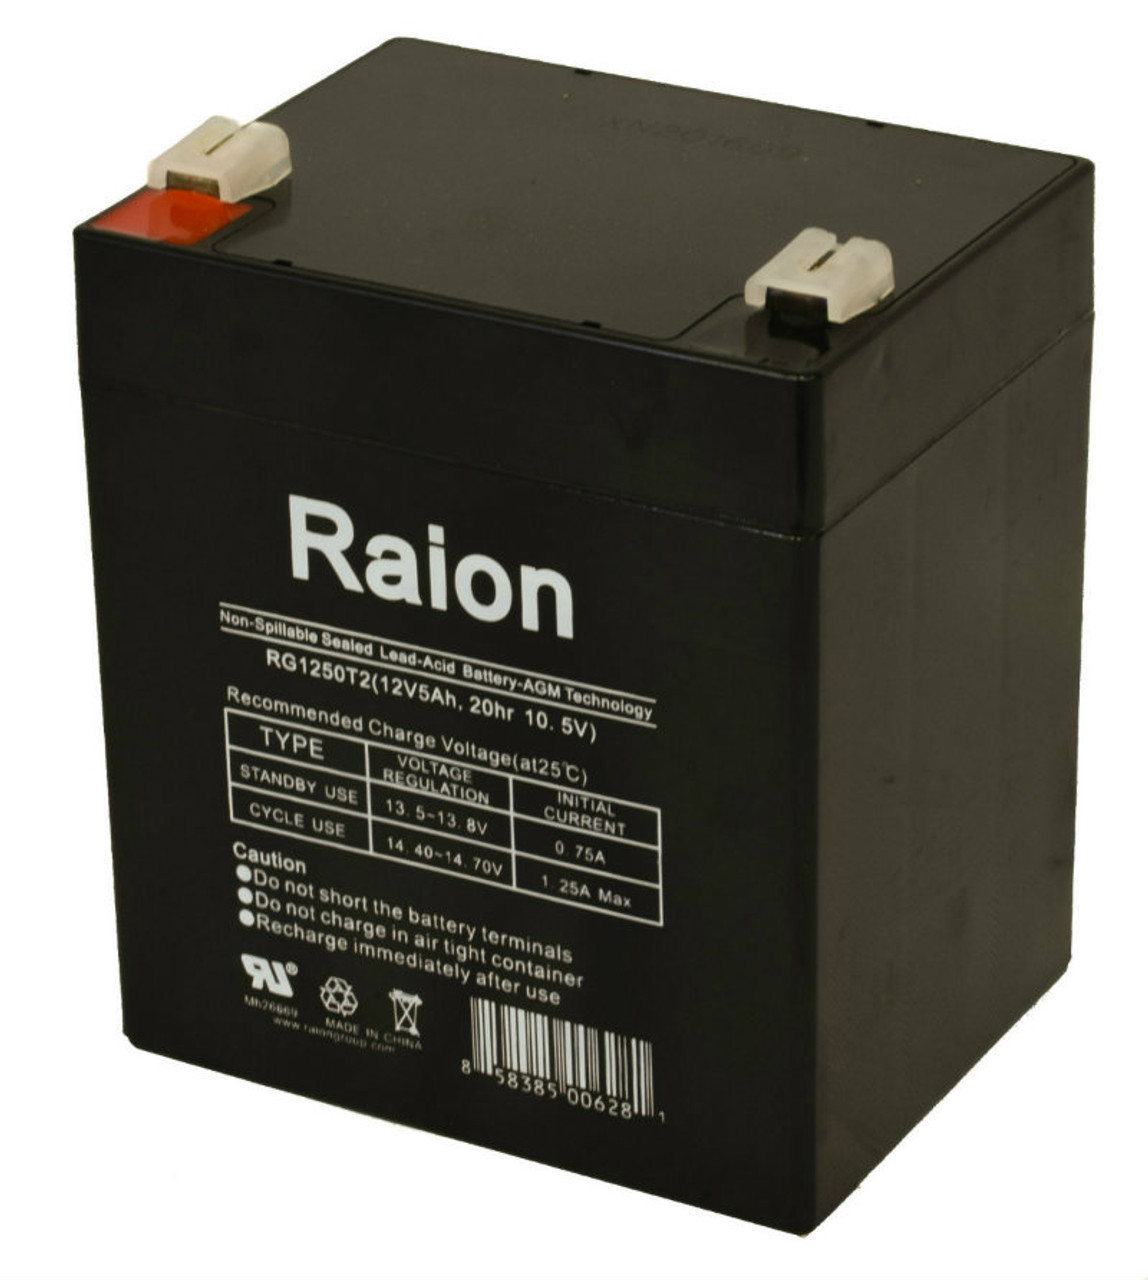 Raion Power RG1250T1 Replacement Alarm Security System Battery for Securitron M62